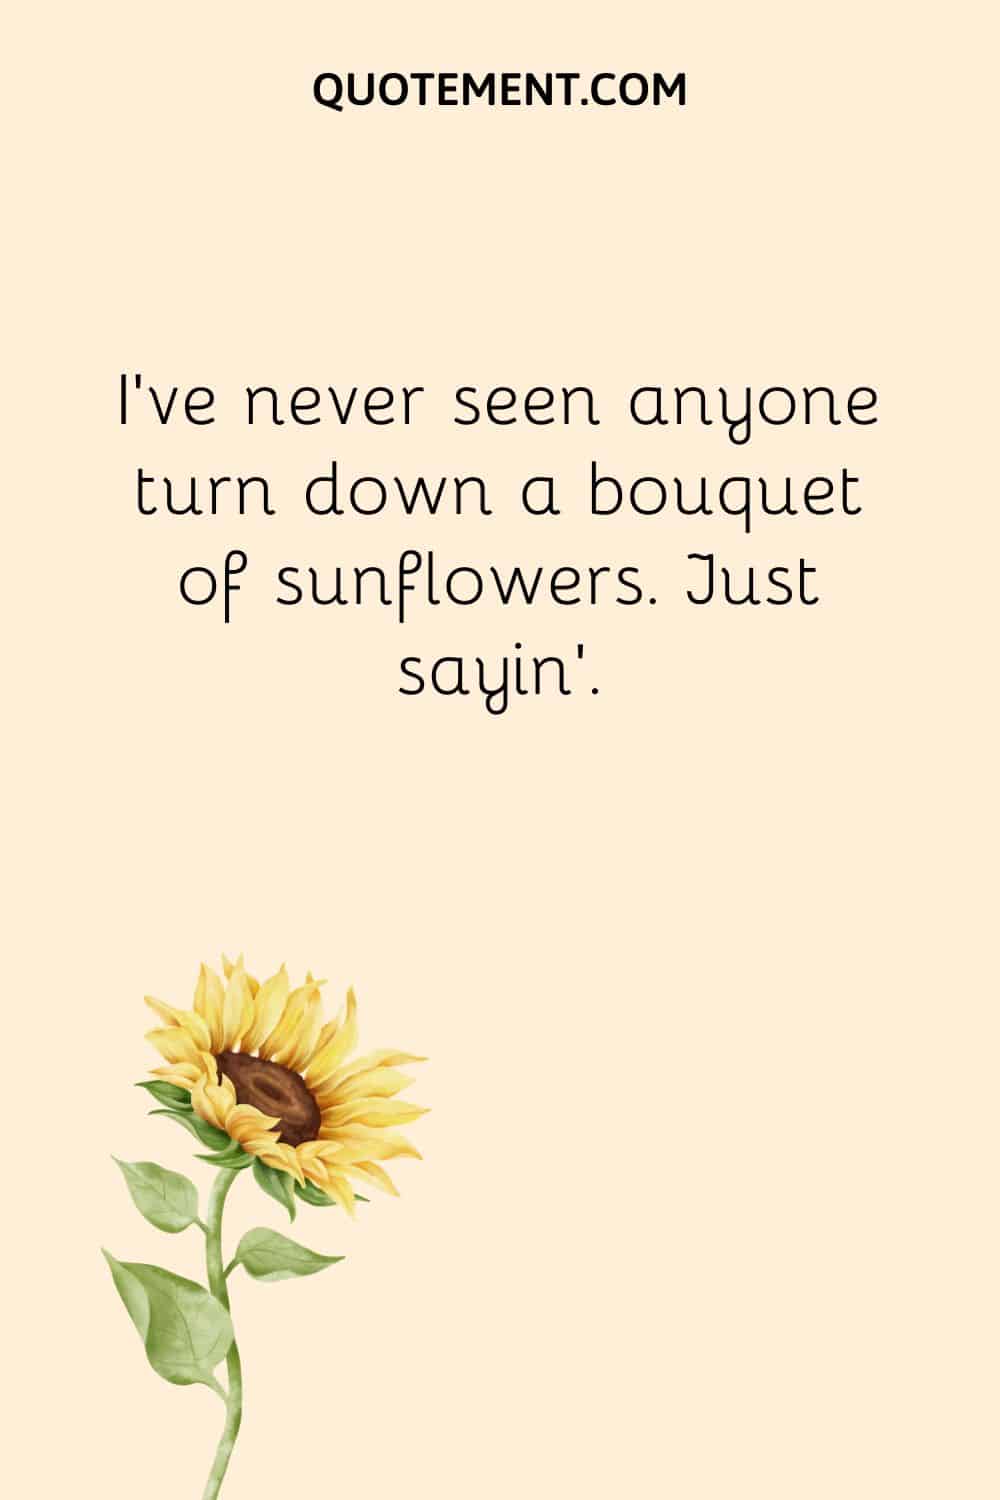 I’ve never seen anyone turn down a bouquet of sunflowers.